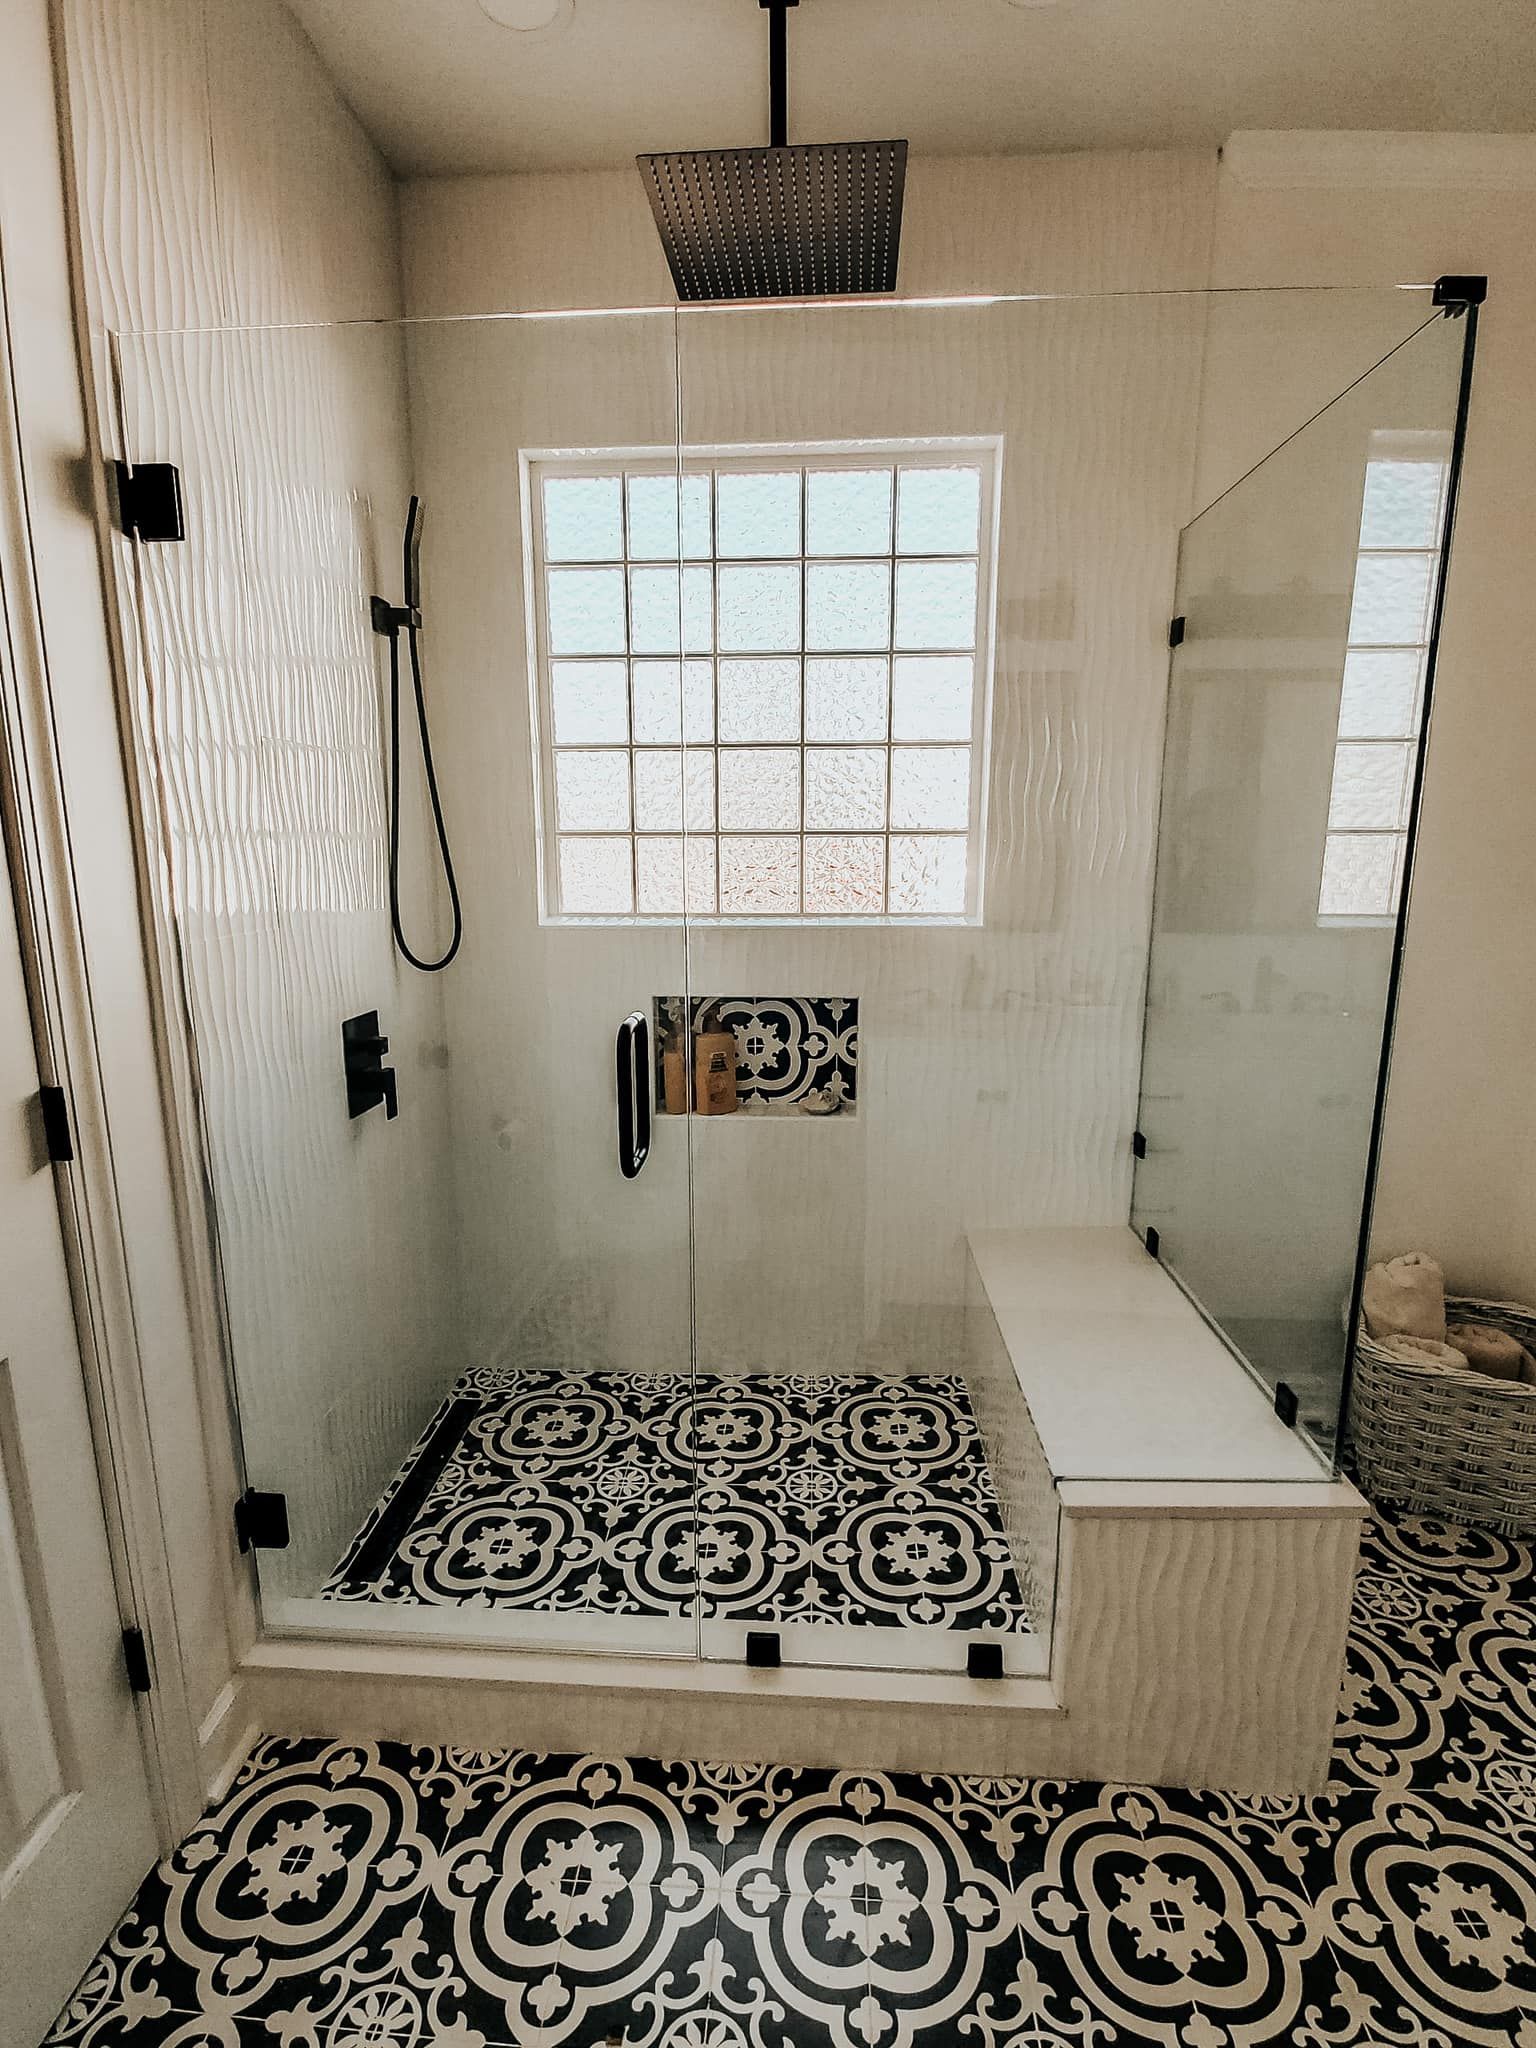 A Shower with a Black and White Tile Floor | Clayton, NC | Clayton Glass & Mirror